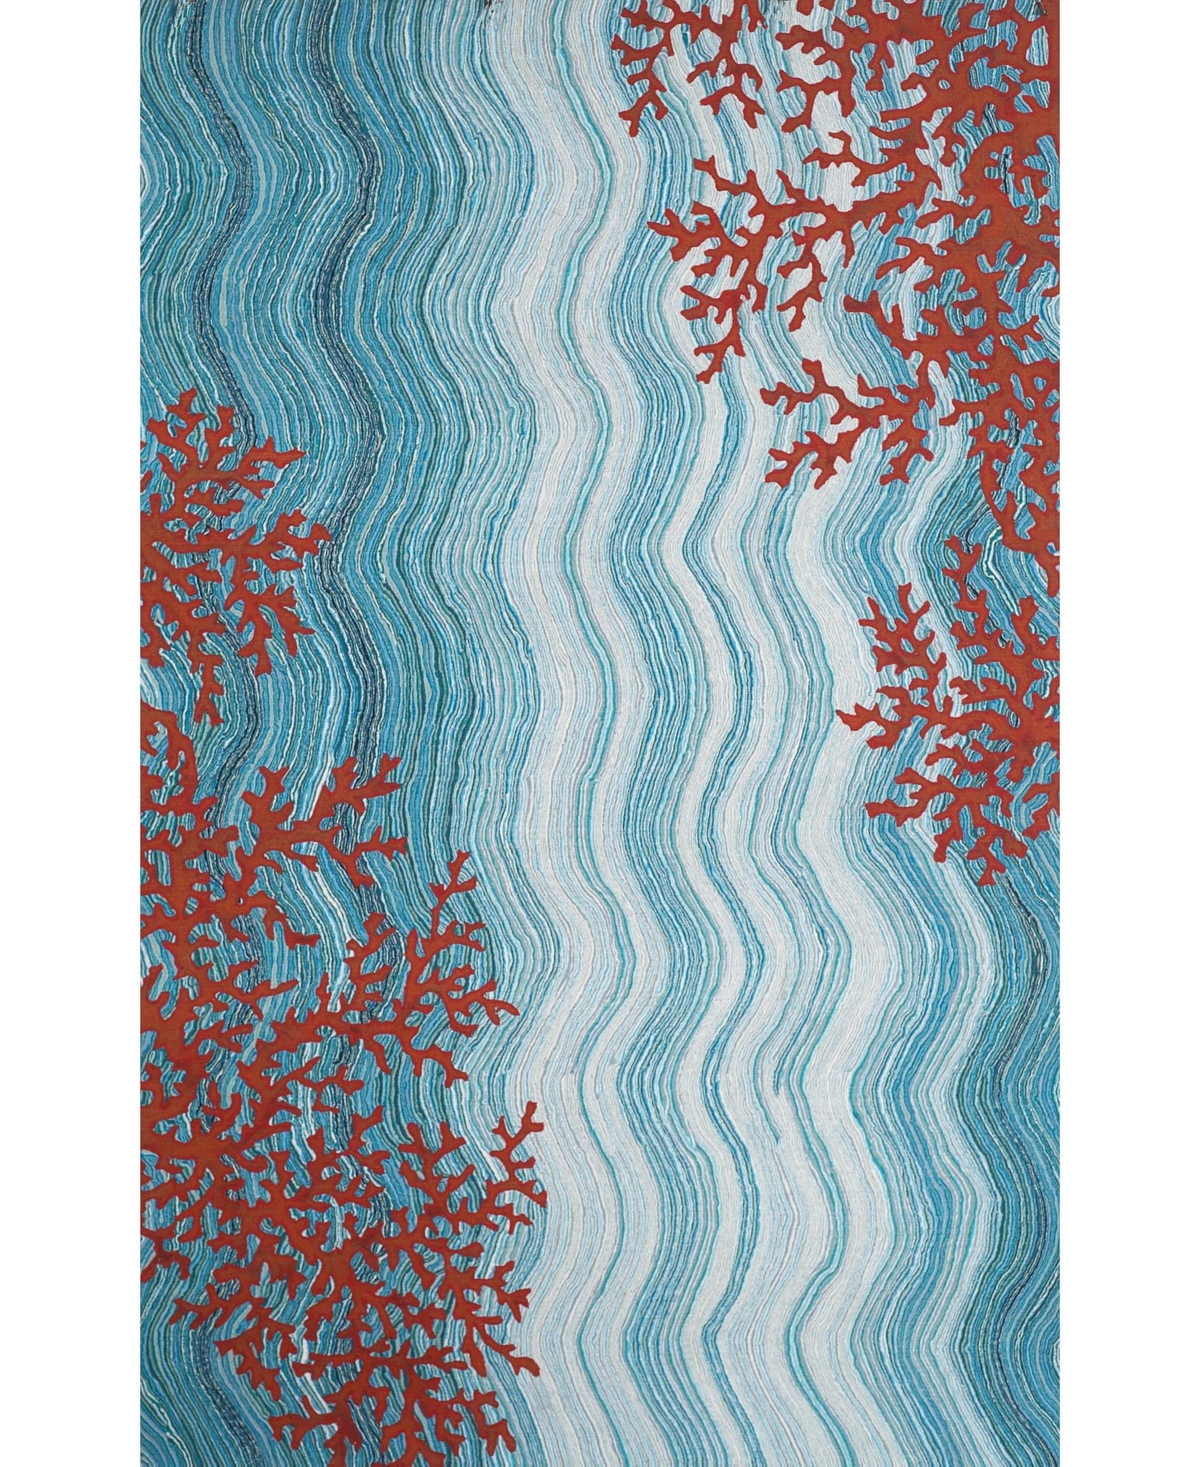 LIORA MANNE VISIONS IV CORAL REEF 5' X 8' OUTDOOR AREA RUG